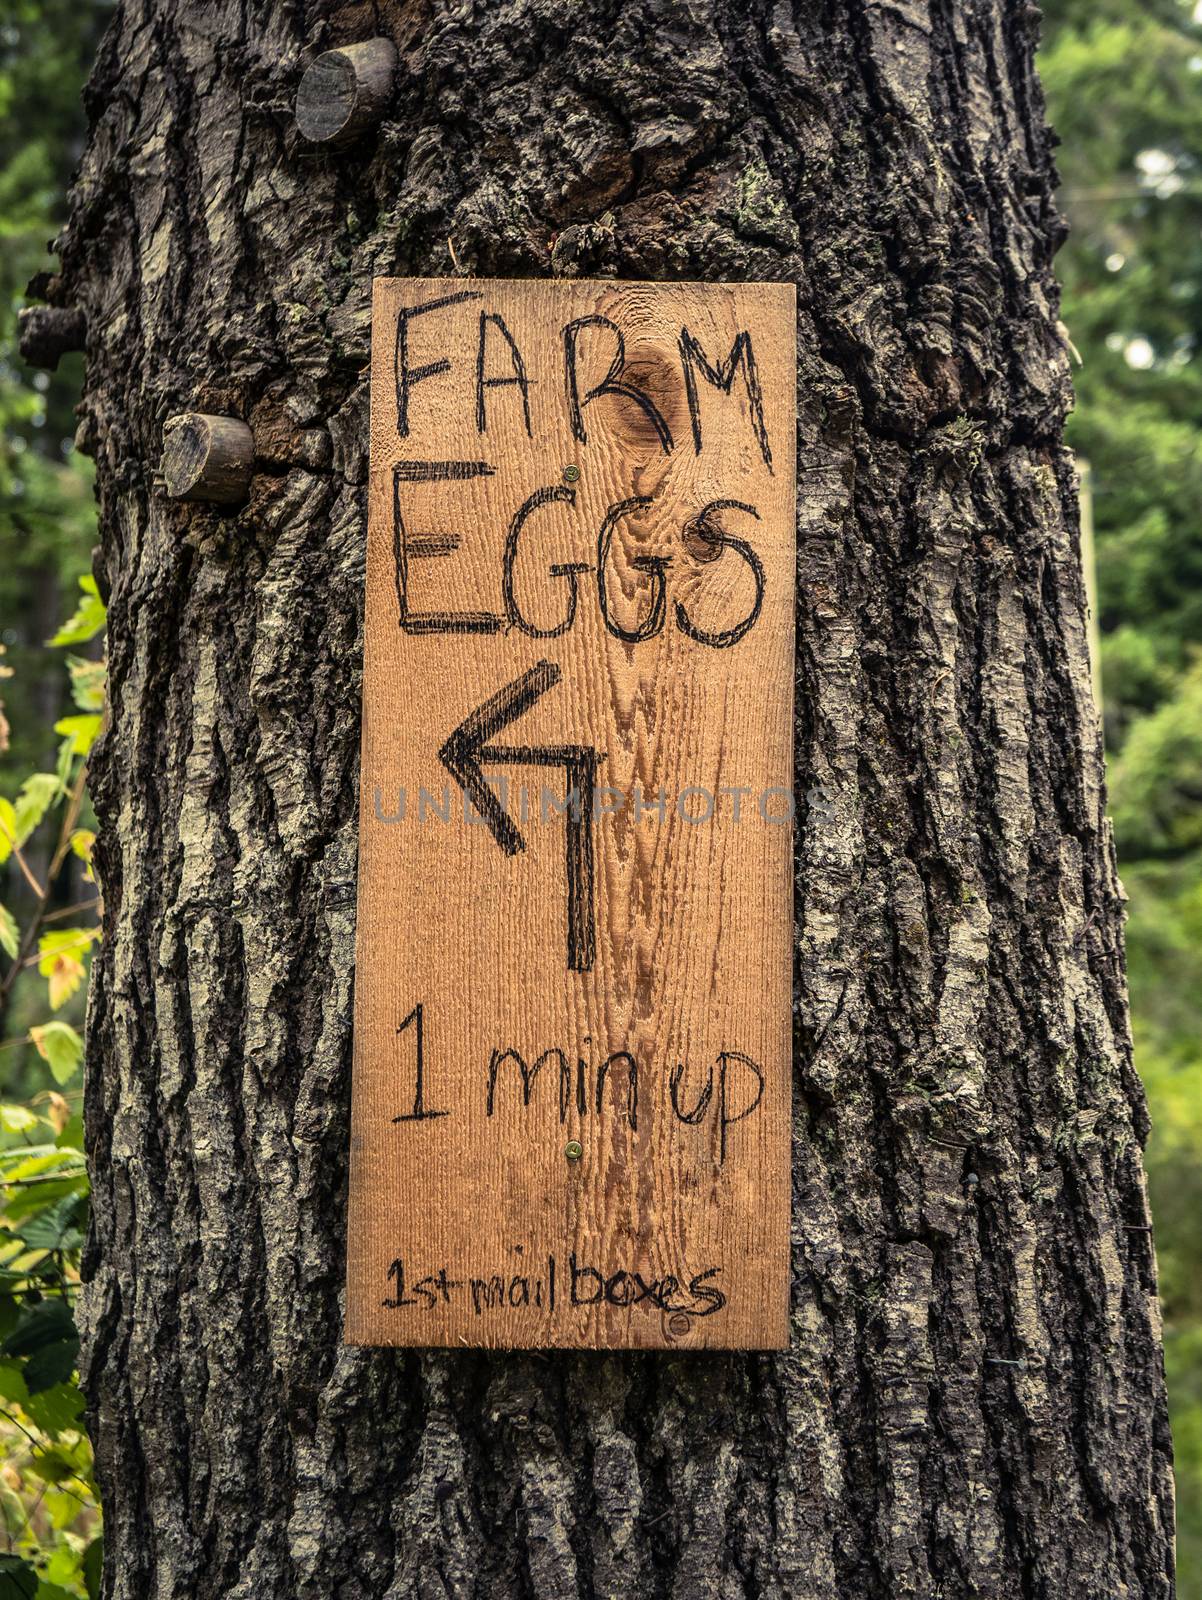 Rustic Sign For Farm Eggs On A Tree In The Countryside